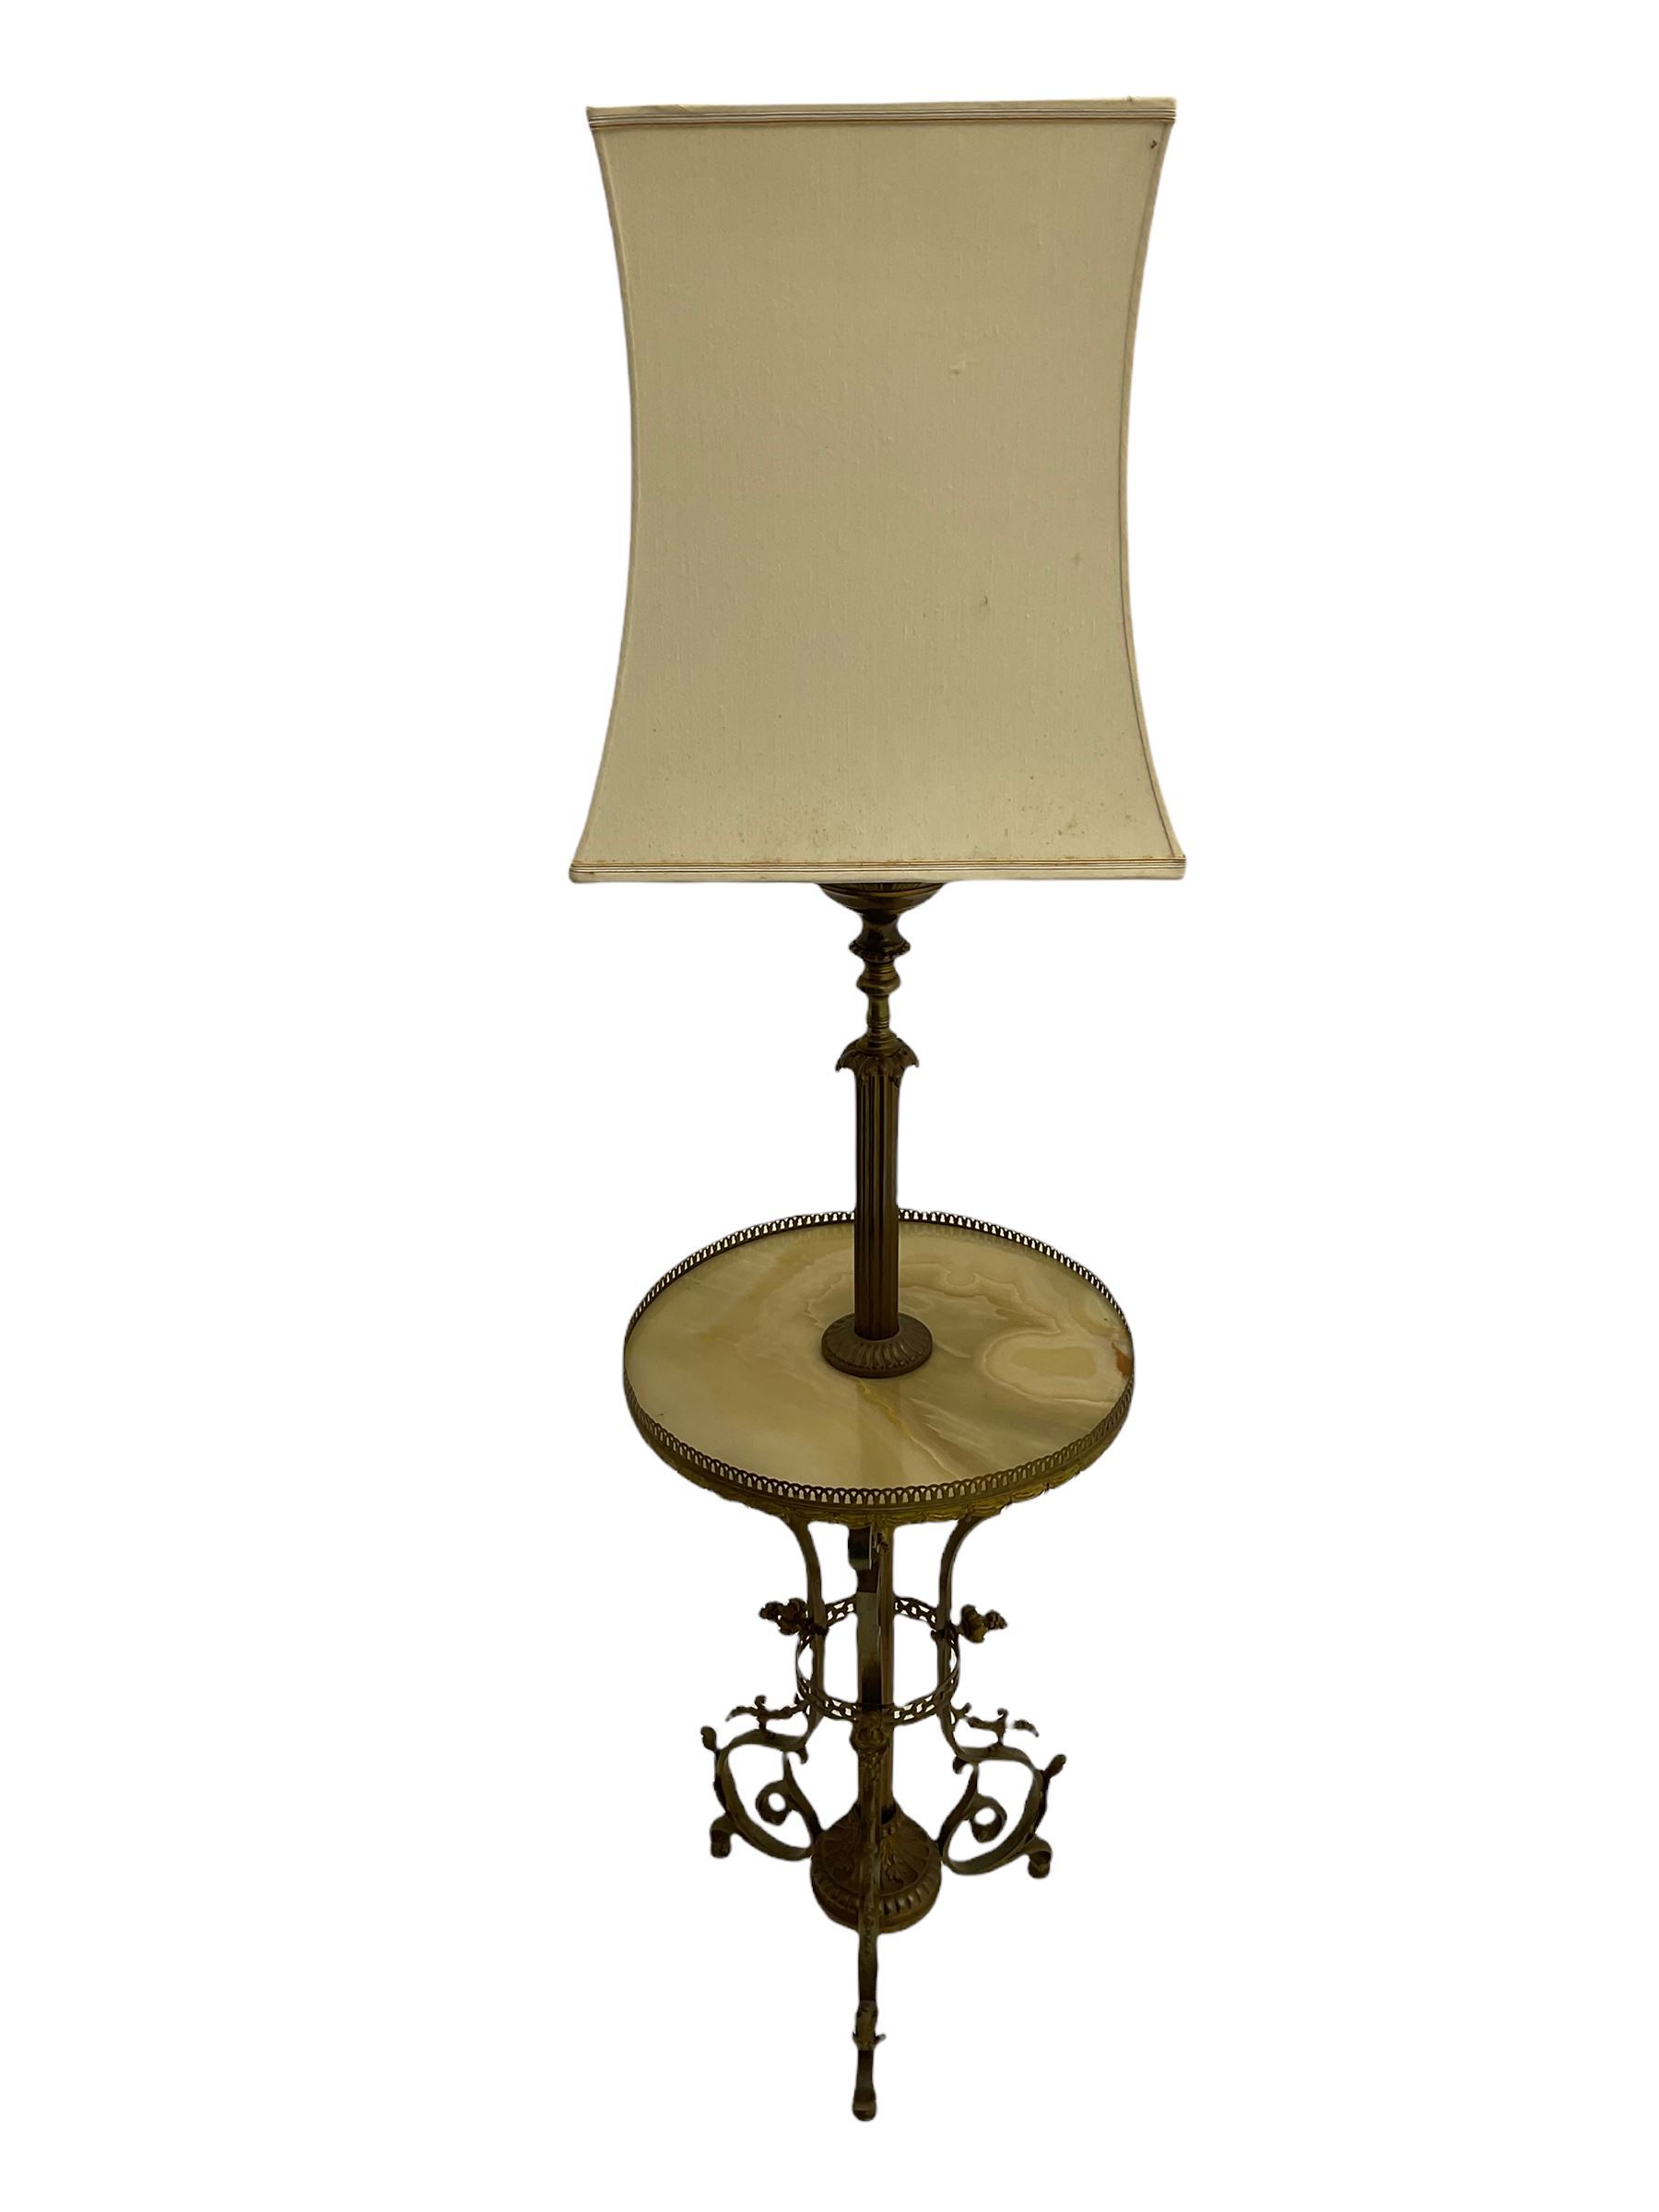 Mid 20th century gilt metal and onyx standard lamp - Image 5 of 6